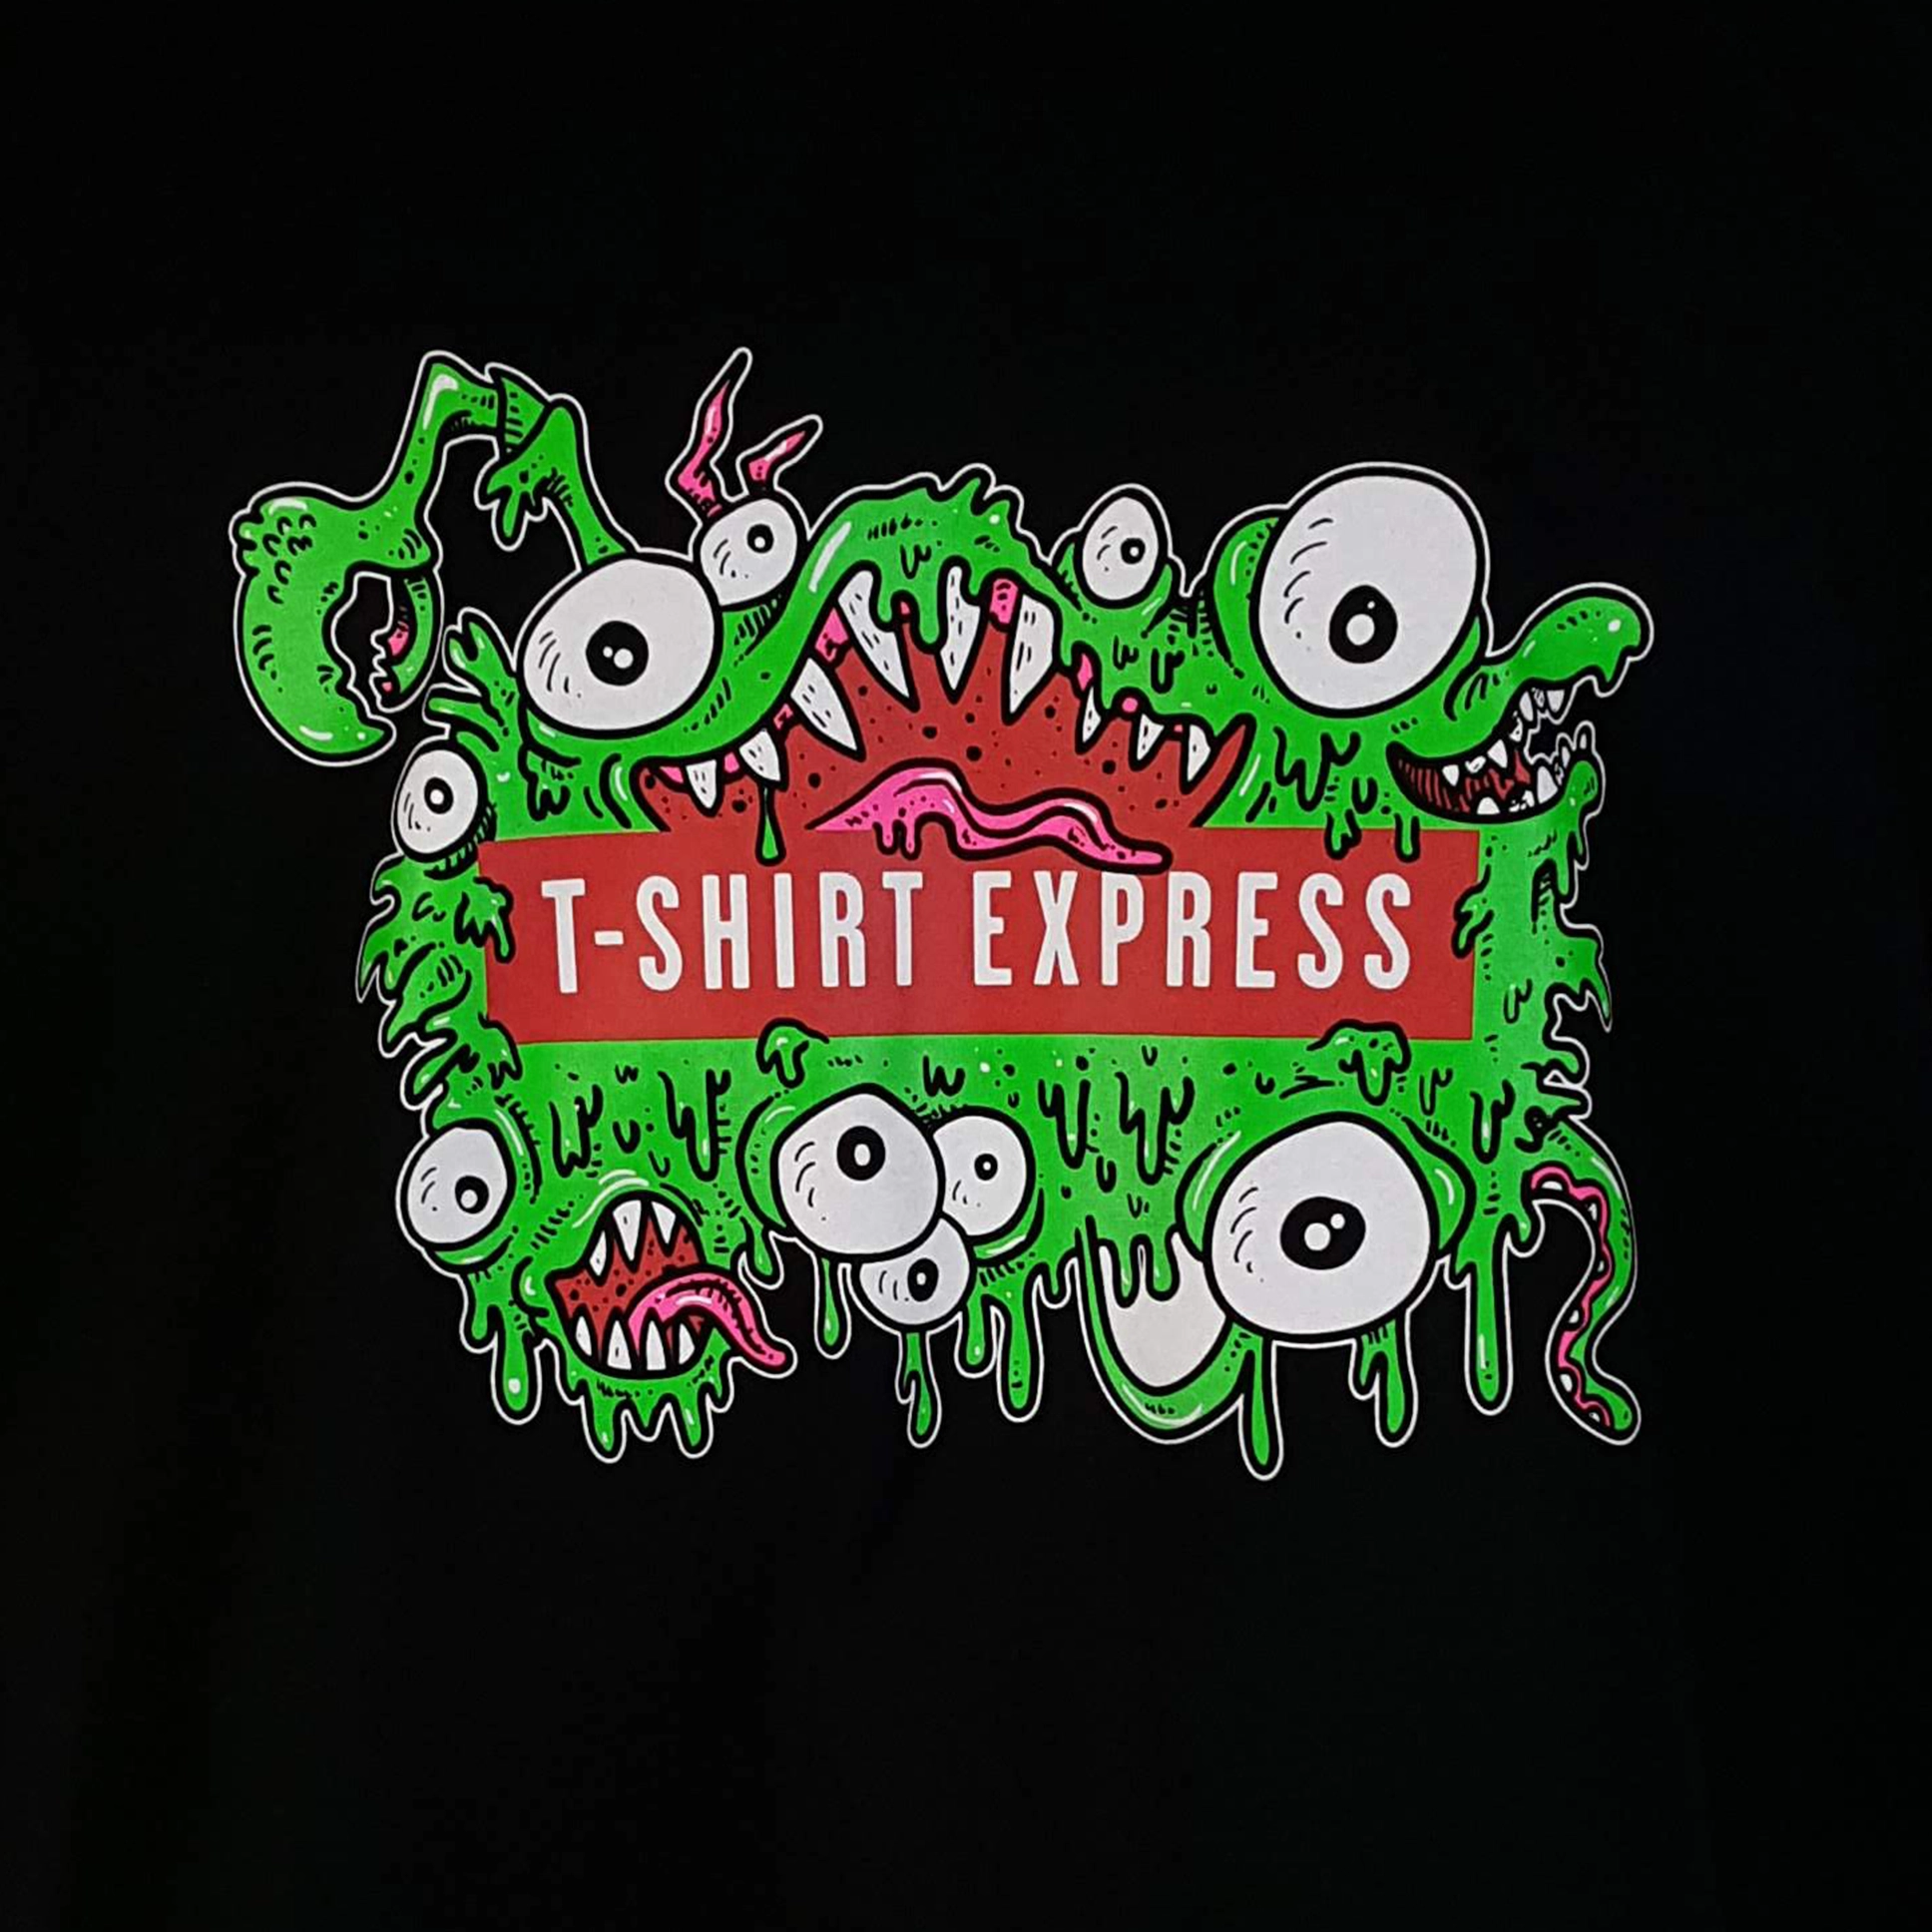 t-shirt express in Bacon ohio